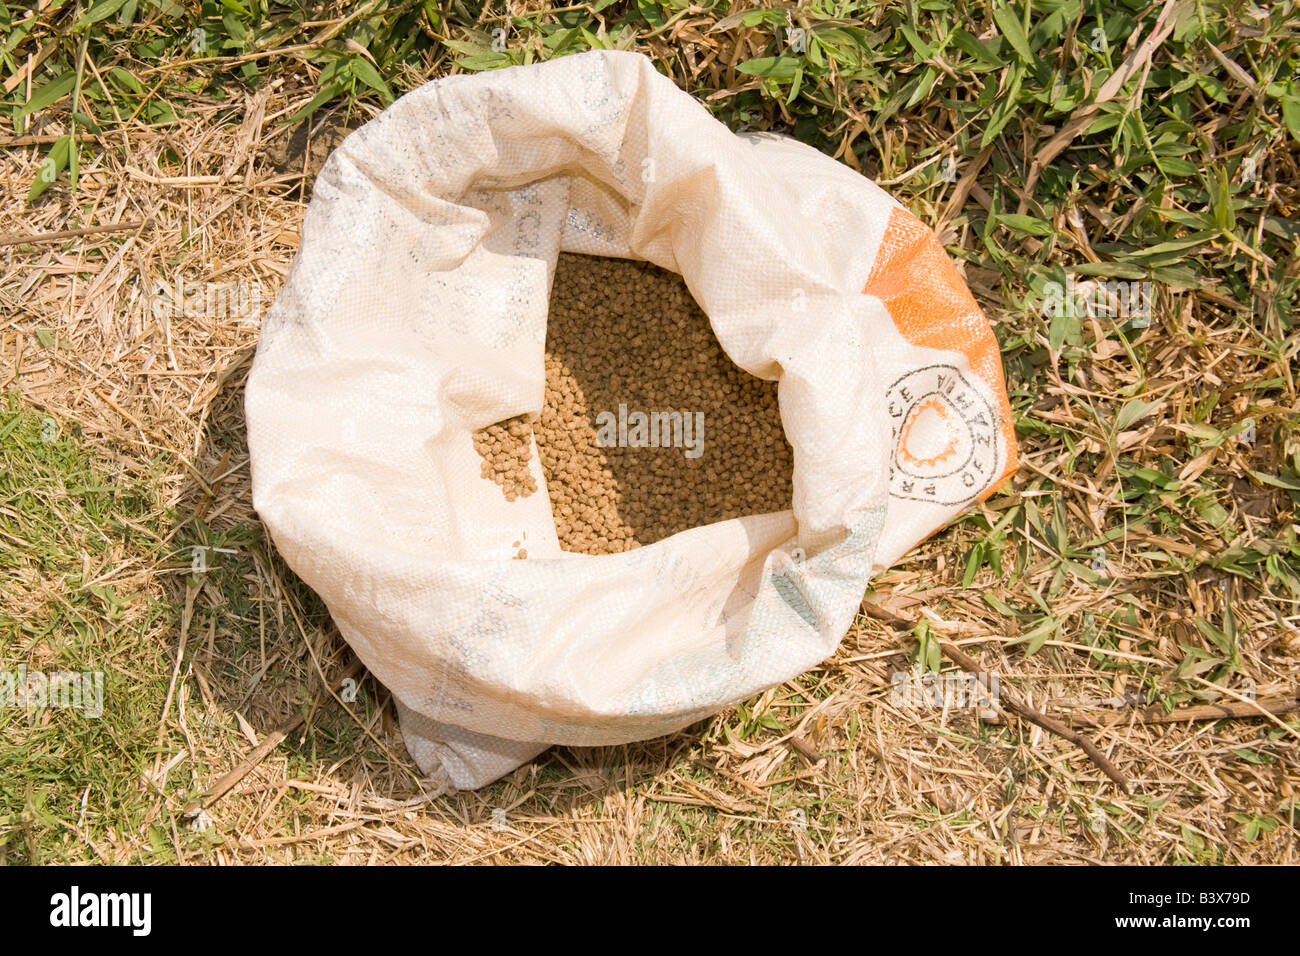 Fish feed pellets at Kafuie Fisheries Zambia Africa Stock Photo